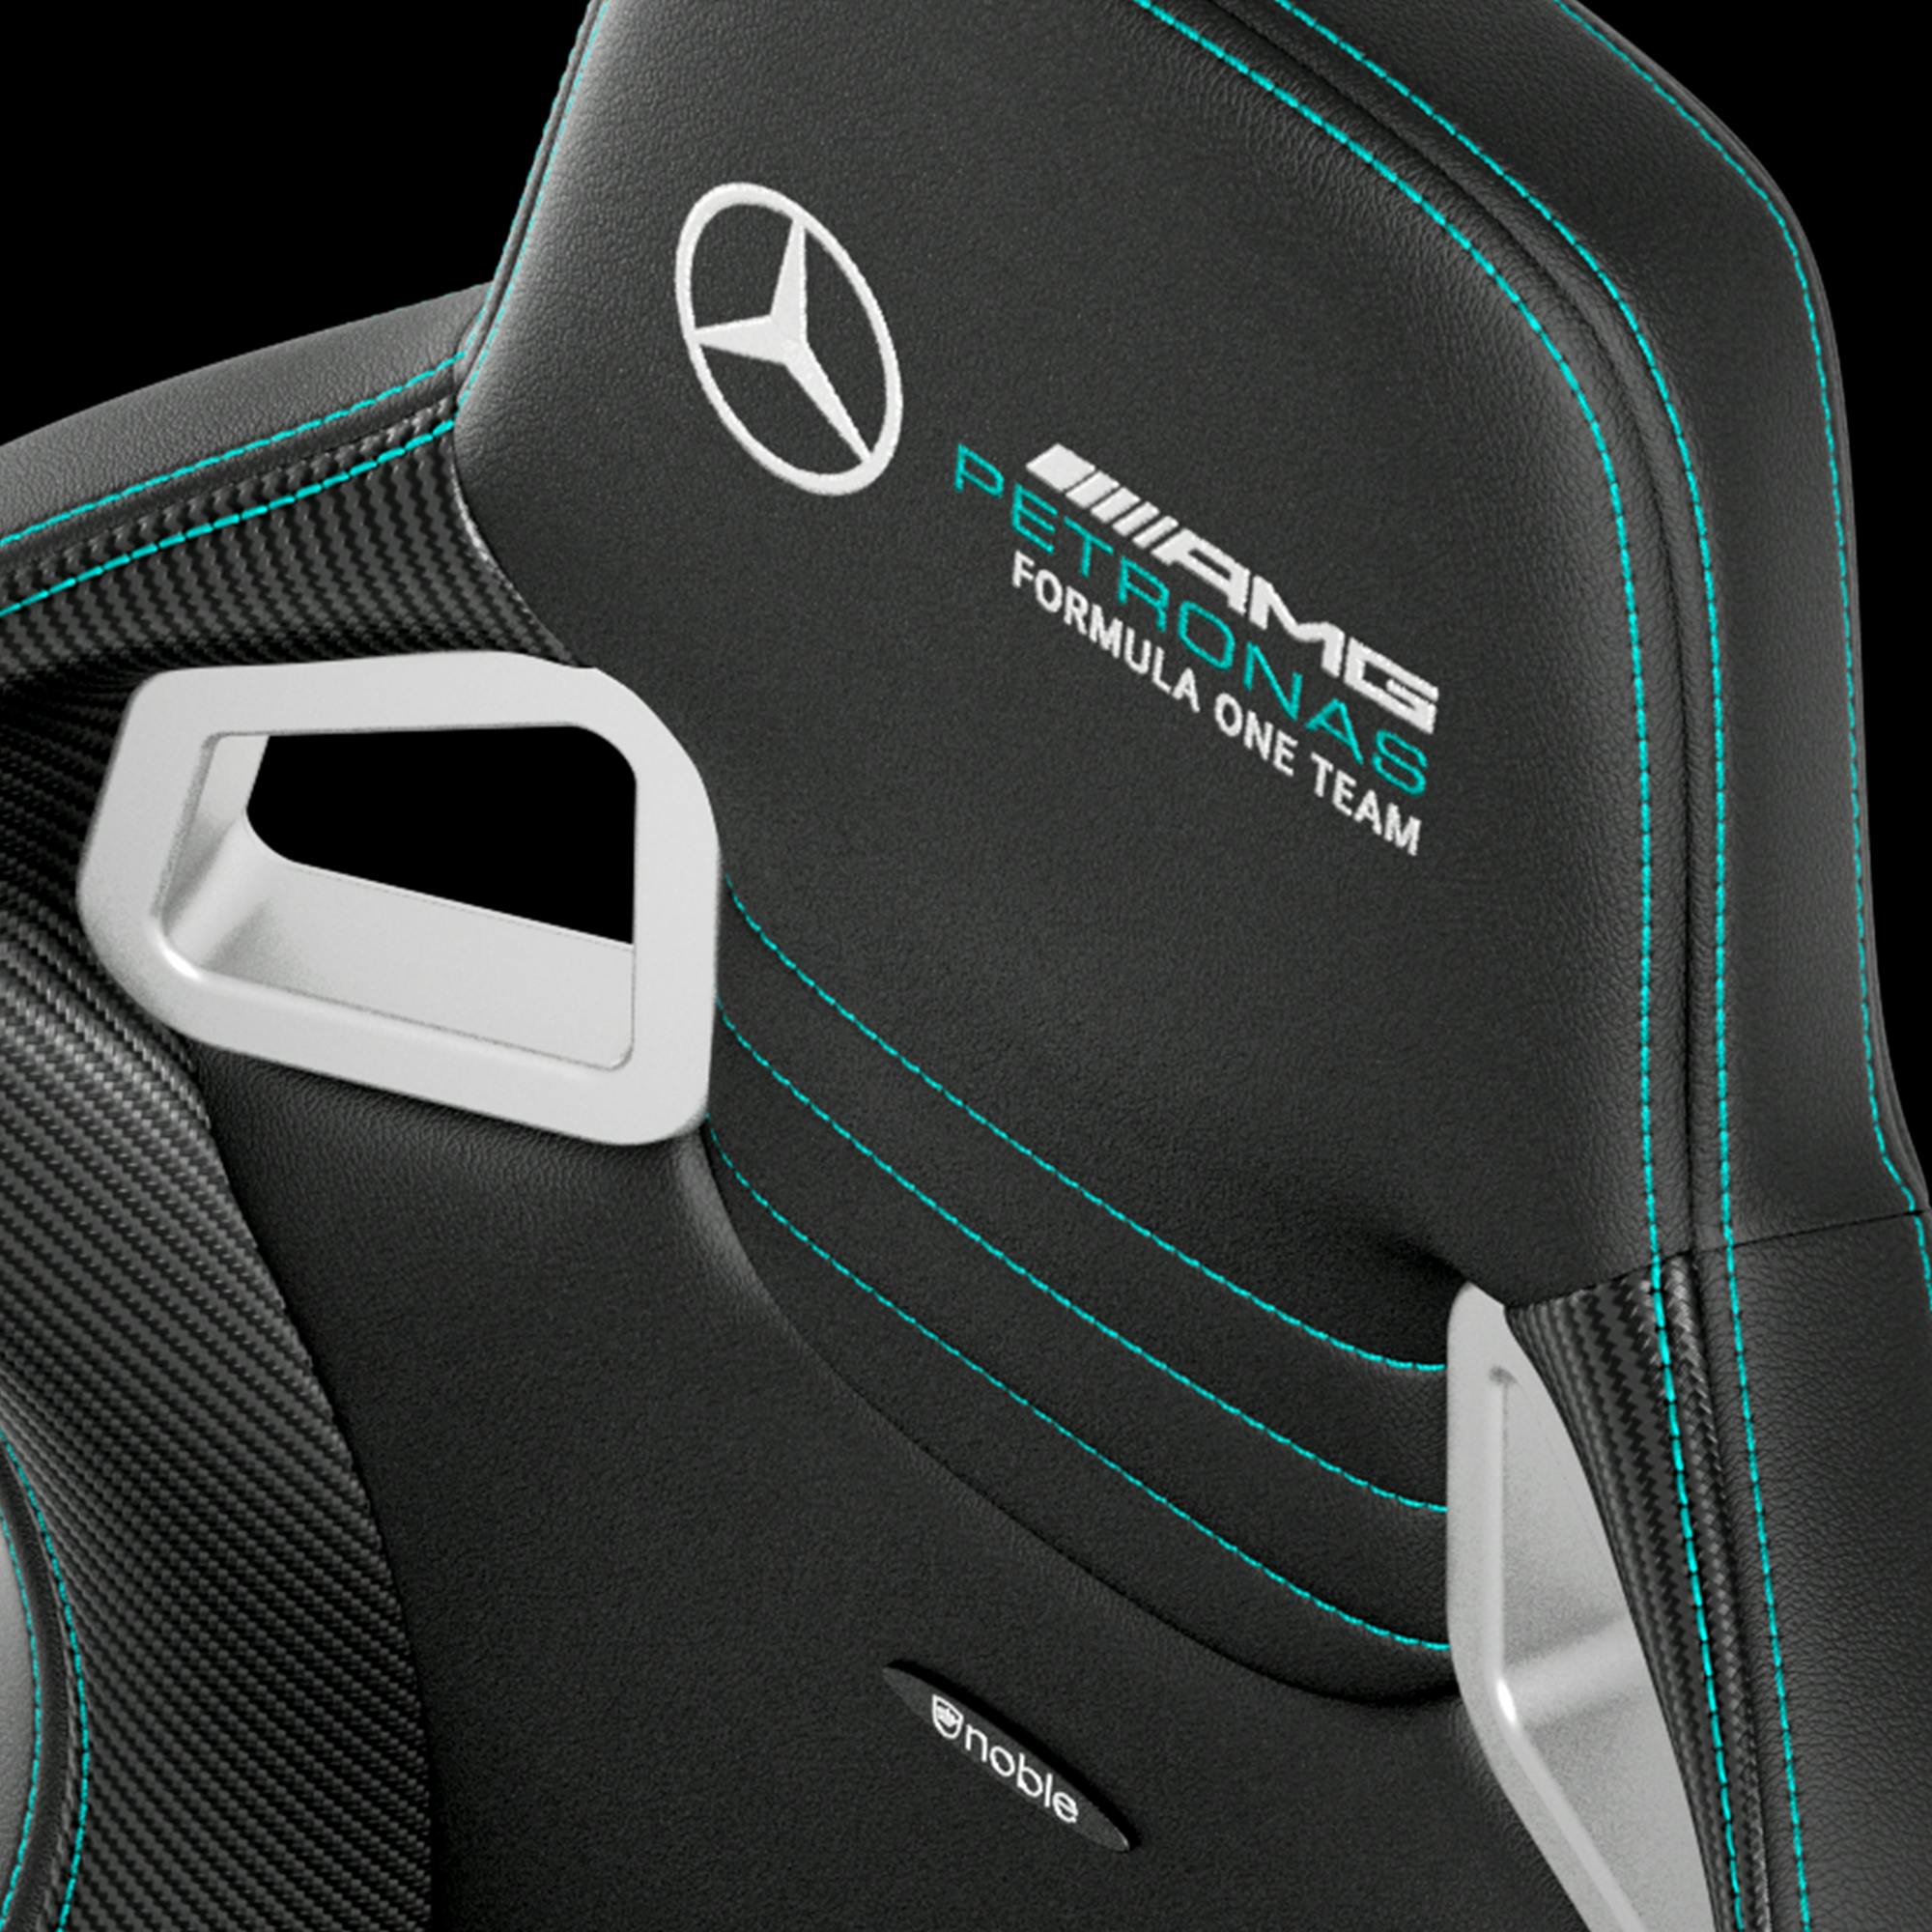 Gaming Chair AMG Mercedes F1 Petronas Vegan PU Leather Highlighted Details View